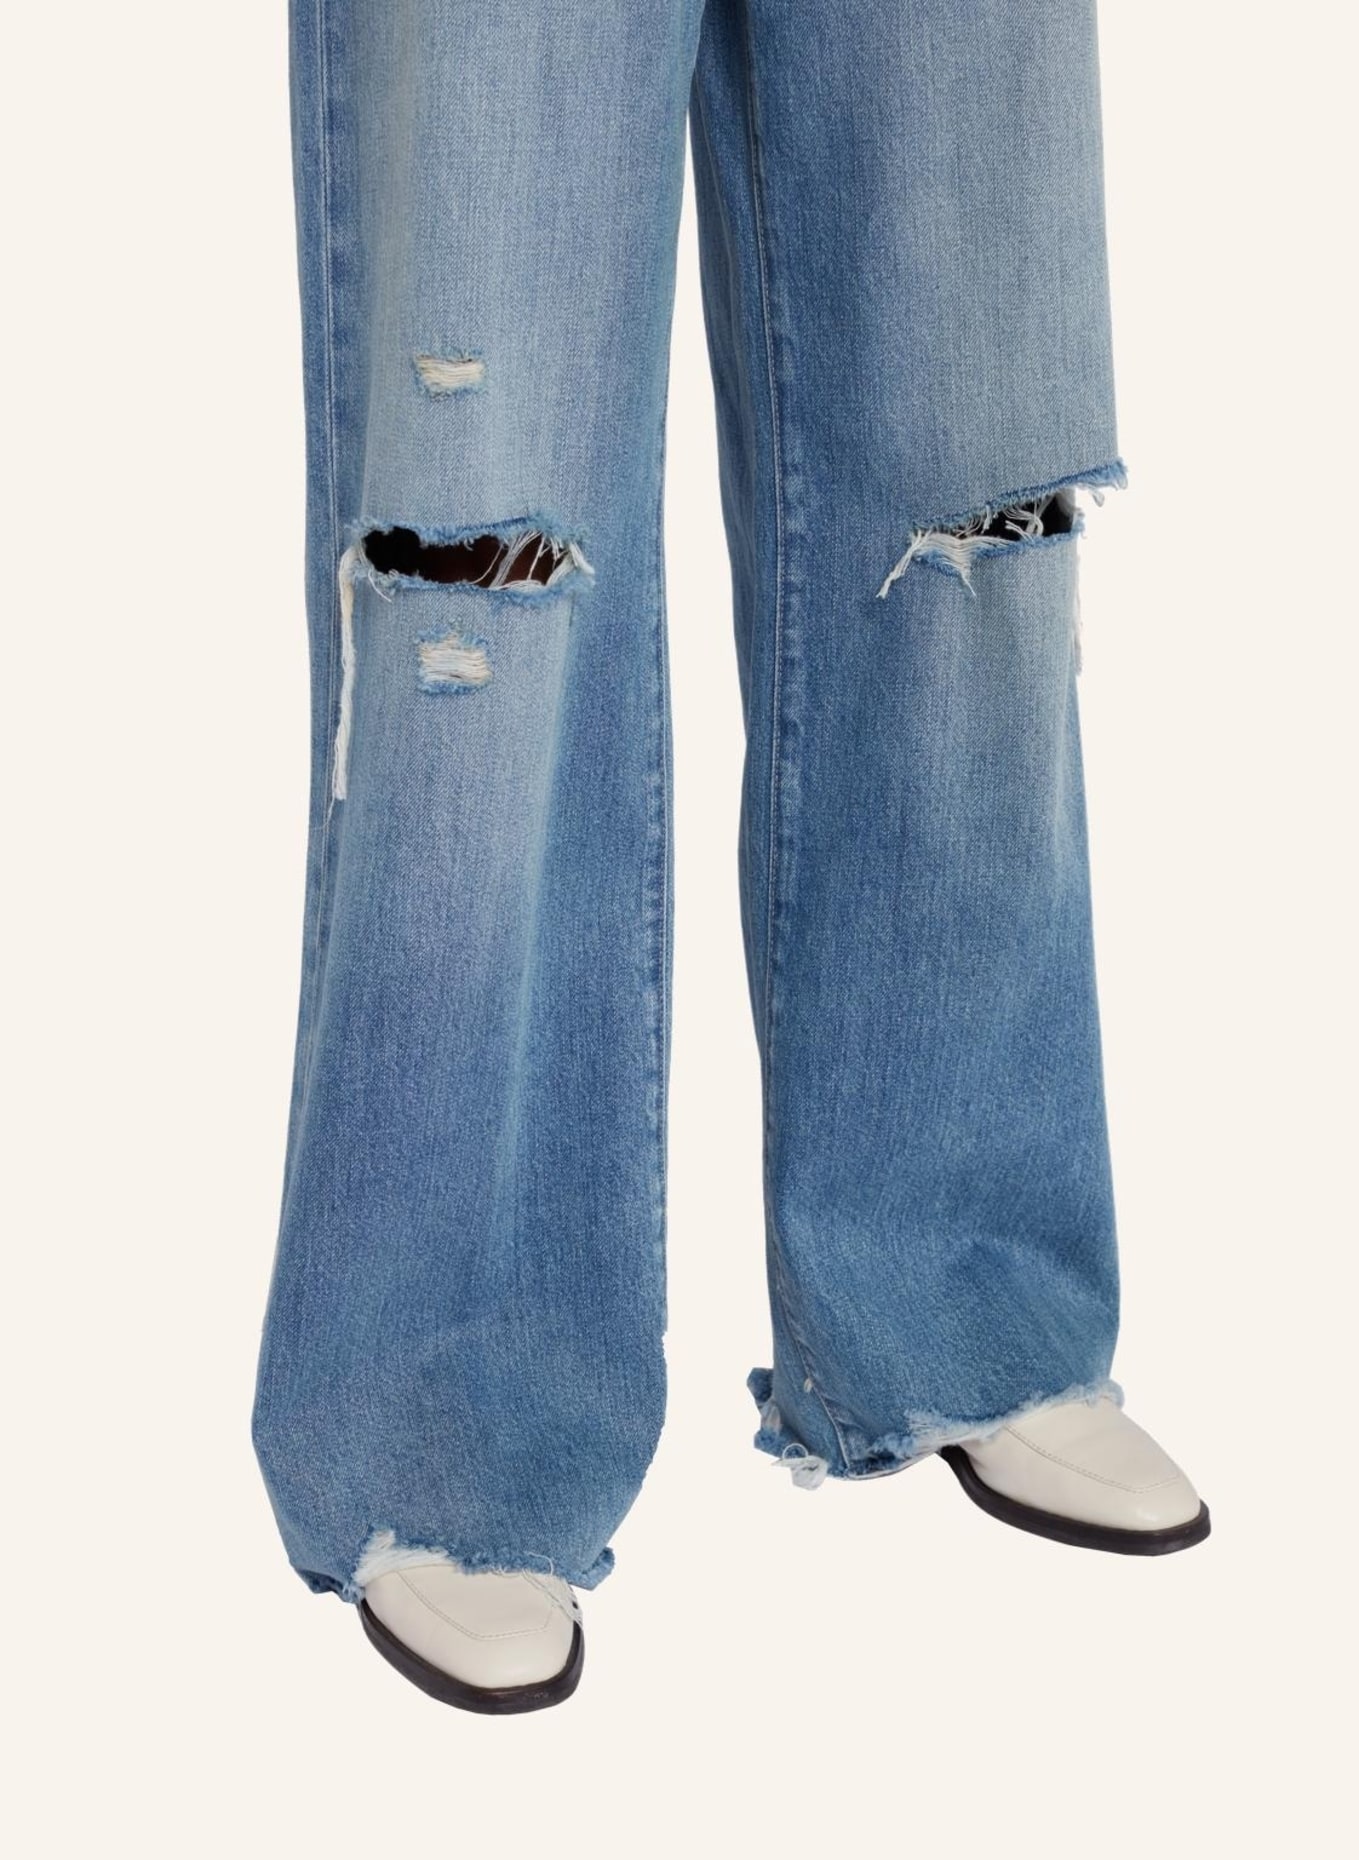 7 for all mankind Jeans SCOUT Straight fit, Farbe: BLAU (Bild 3)